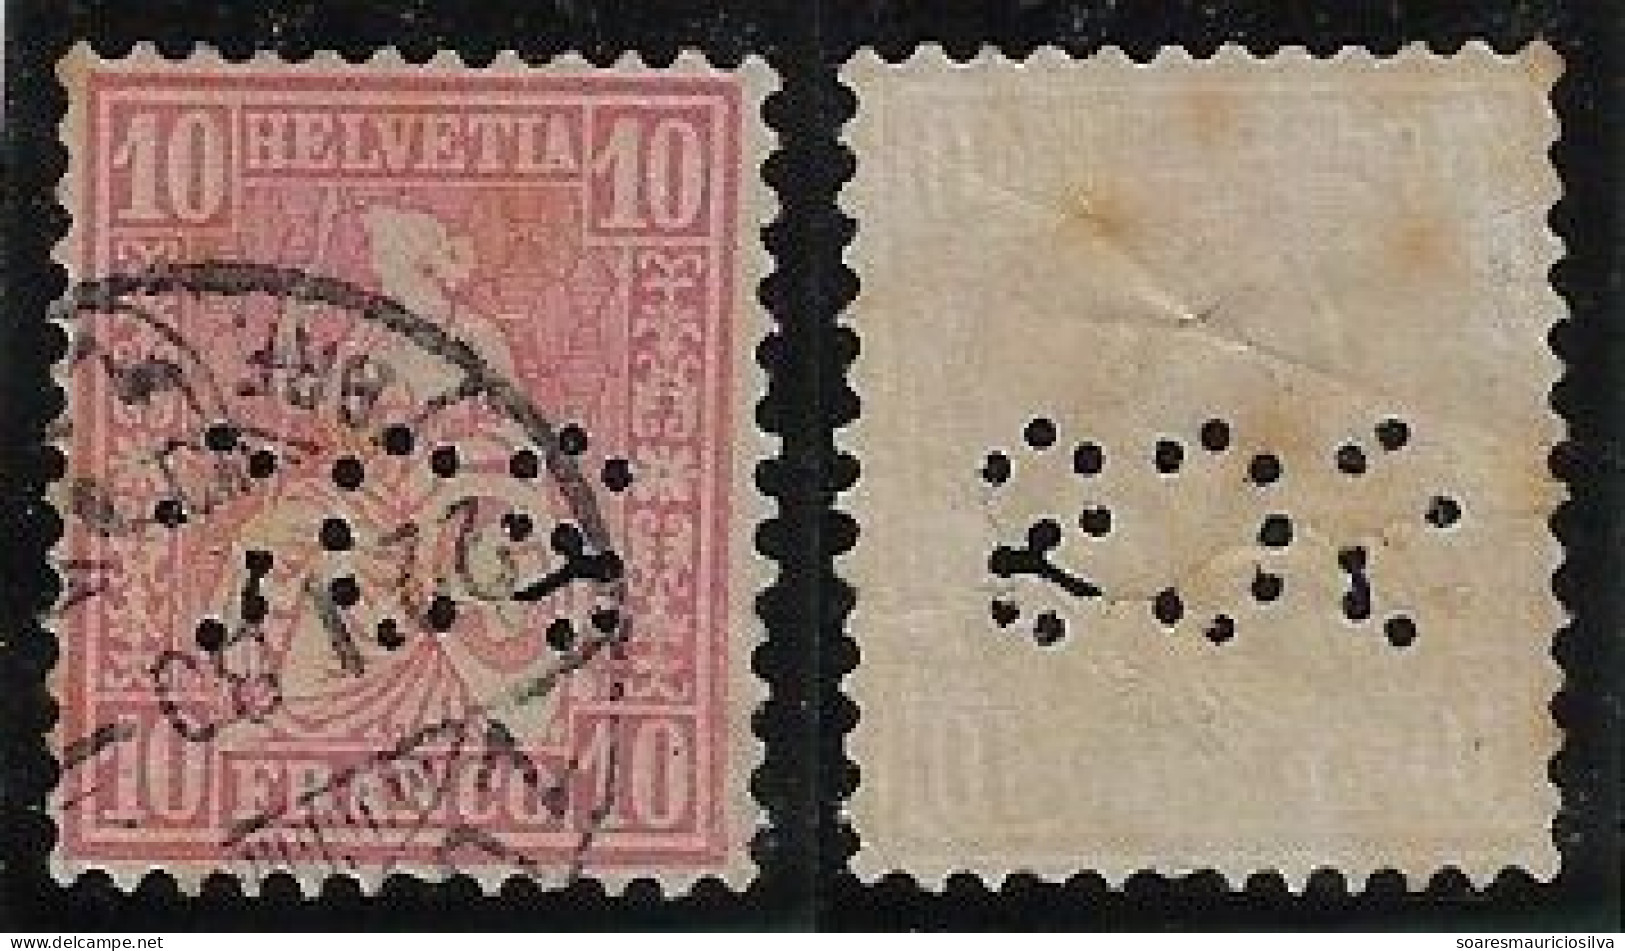 Switzerland 1874/1893 Stamp Perfin SCS By Société Crédit Suisse Swiss Credit Company From Zuriche Lochung Perfore - Perfin